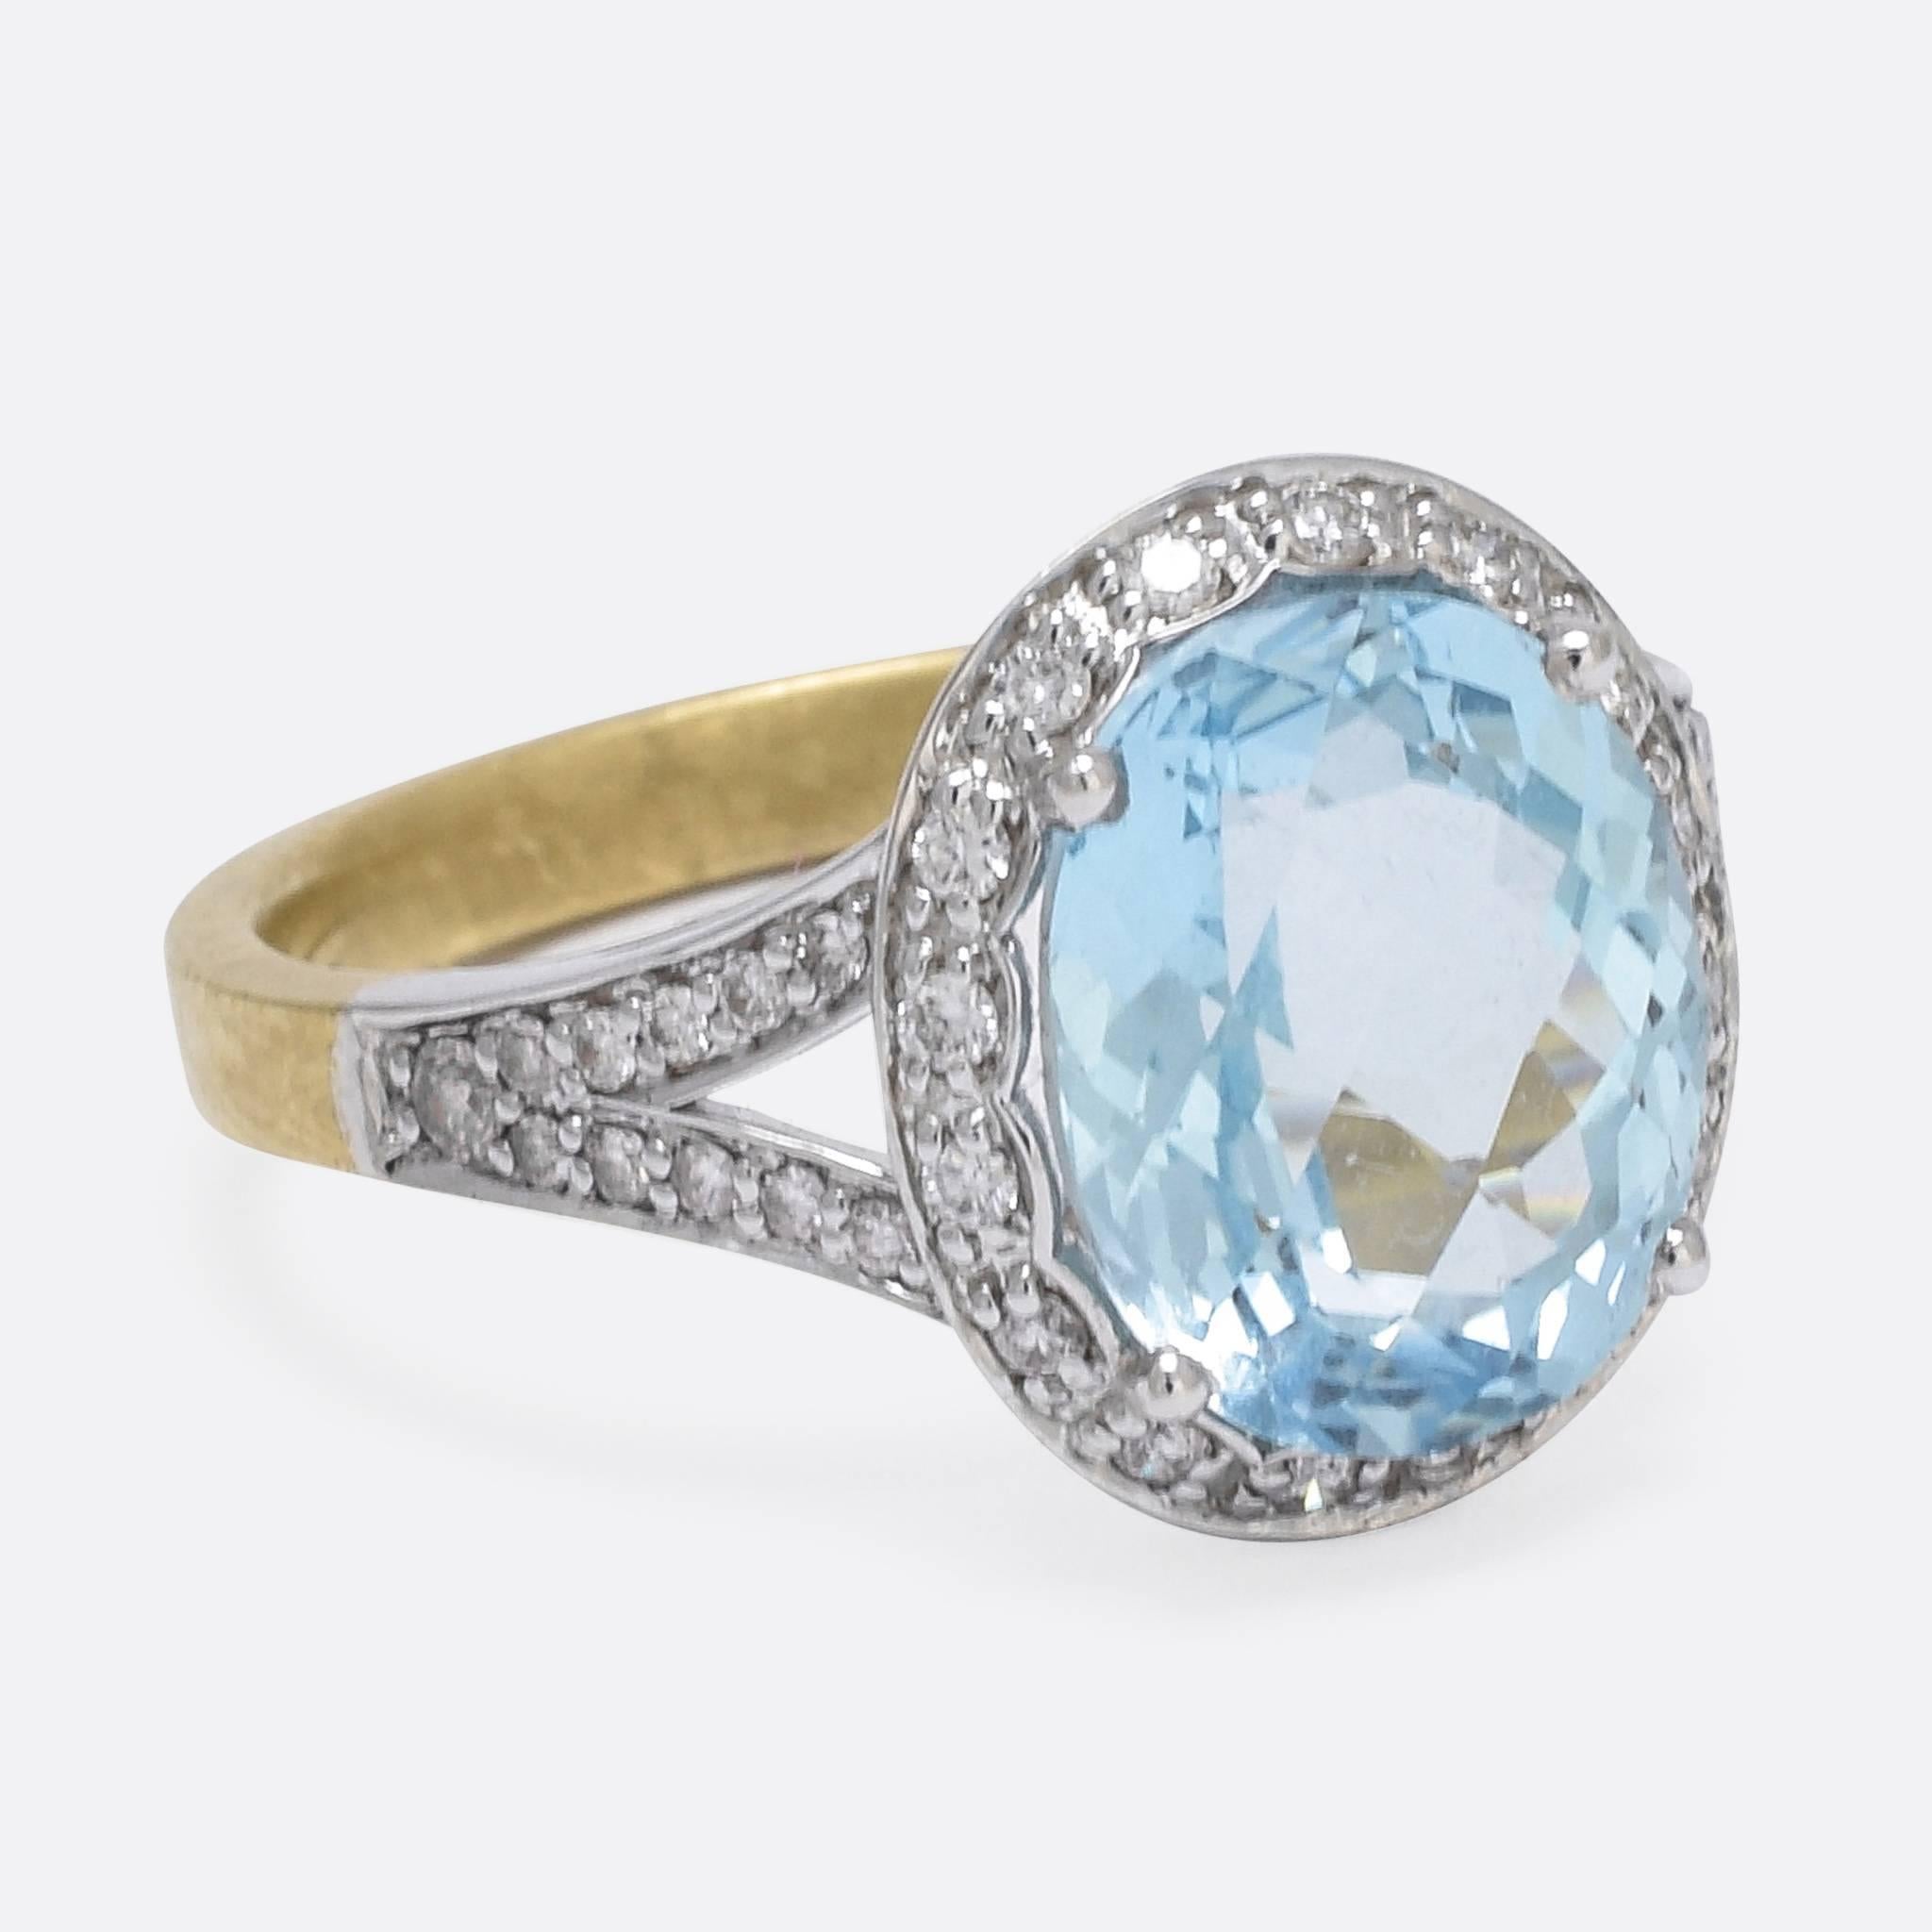 This stunning contemporary cluster ring is set with a dreamy checker cut aquamarine, surrounded by a scalloped halo of white diamonds. The split shoulders are set with further diamonds, and a stylish open gallery allows the stone to be illuminated